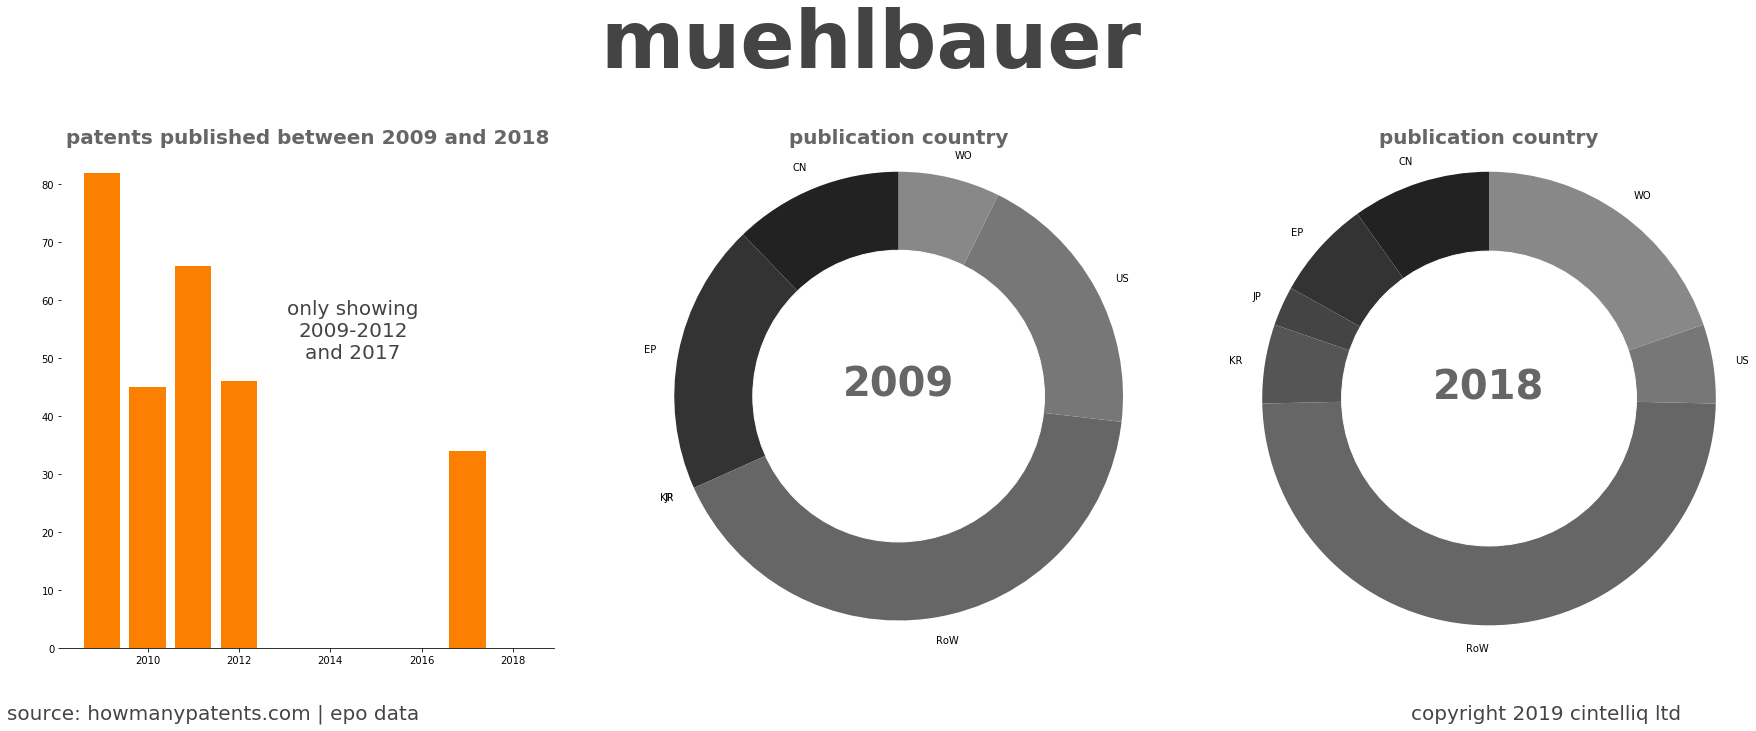 summary of patents for Muehlbauer